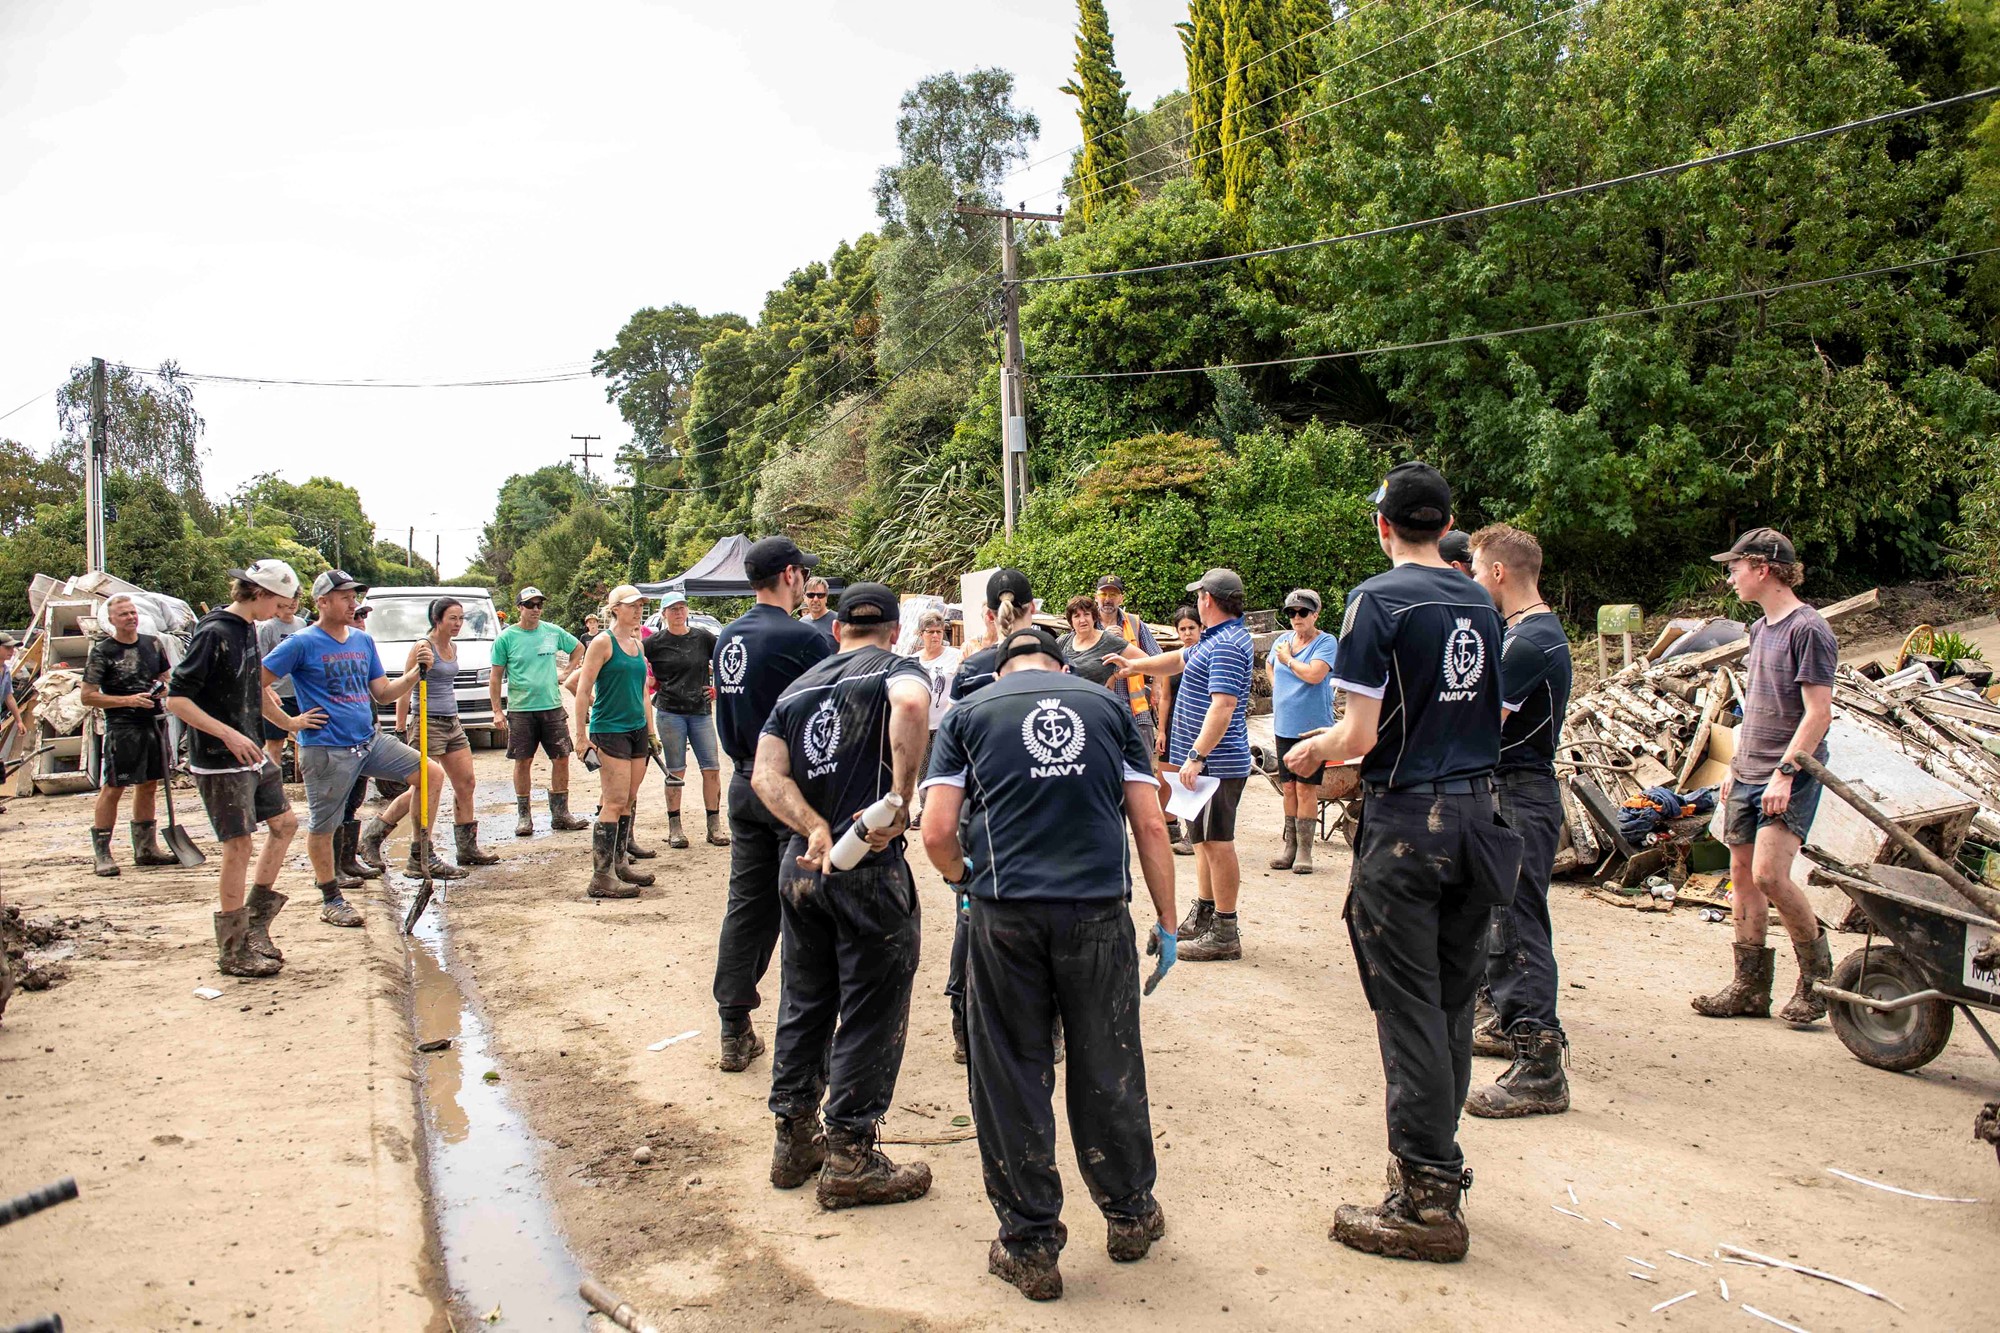 HMNZS Te Mana crew members help with a clean up after a small creek bursts its bank causing houses to flood in Havelock North, New Zealand